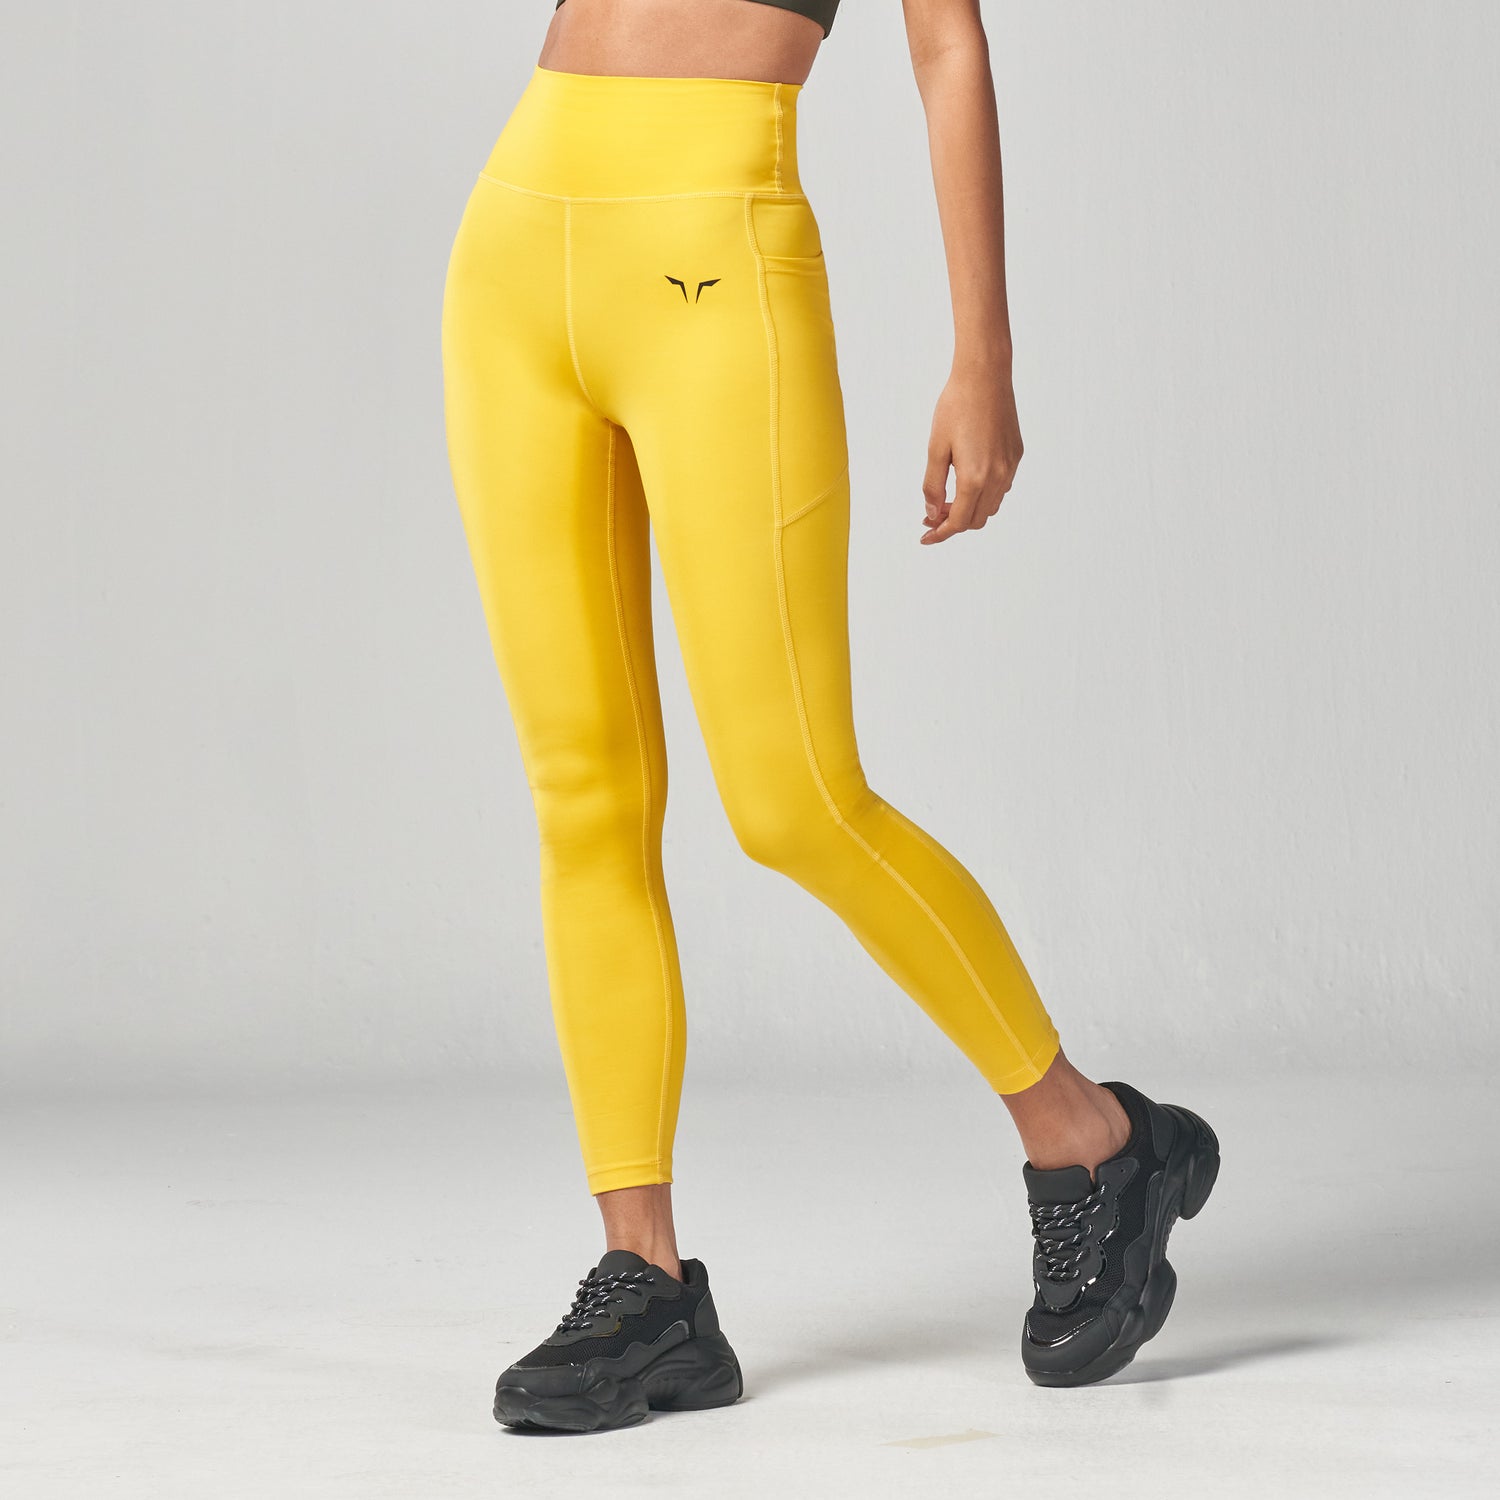 squatwolf-workout-clothes-essential-cropped-leggings-yellow-leggings-for-women